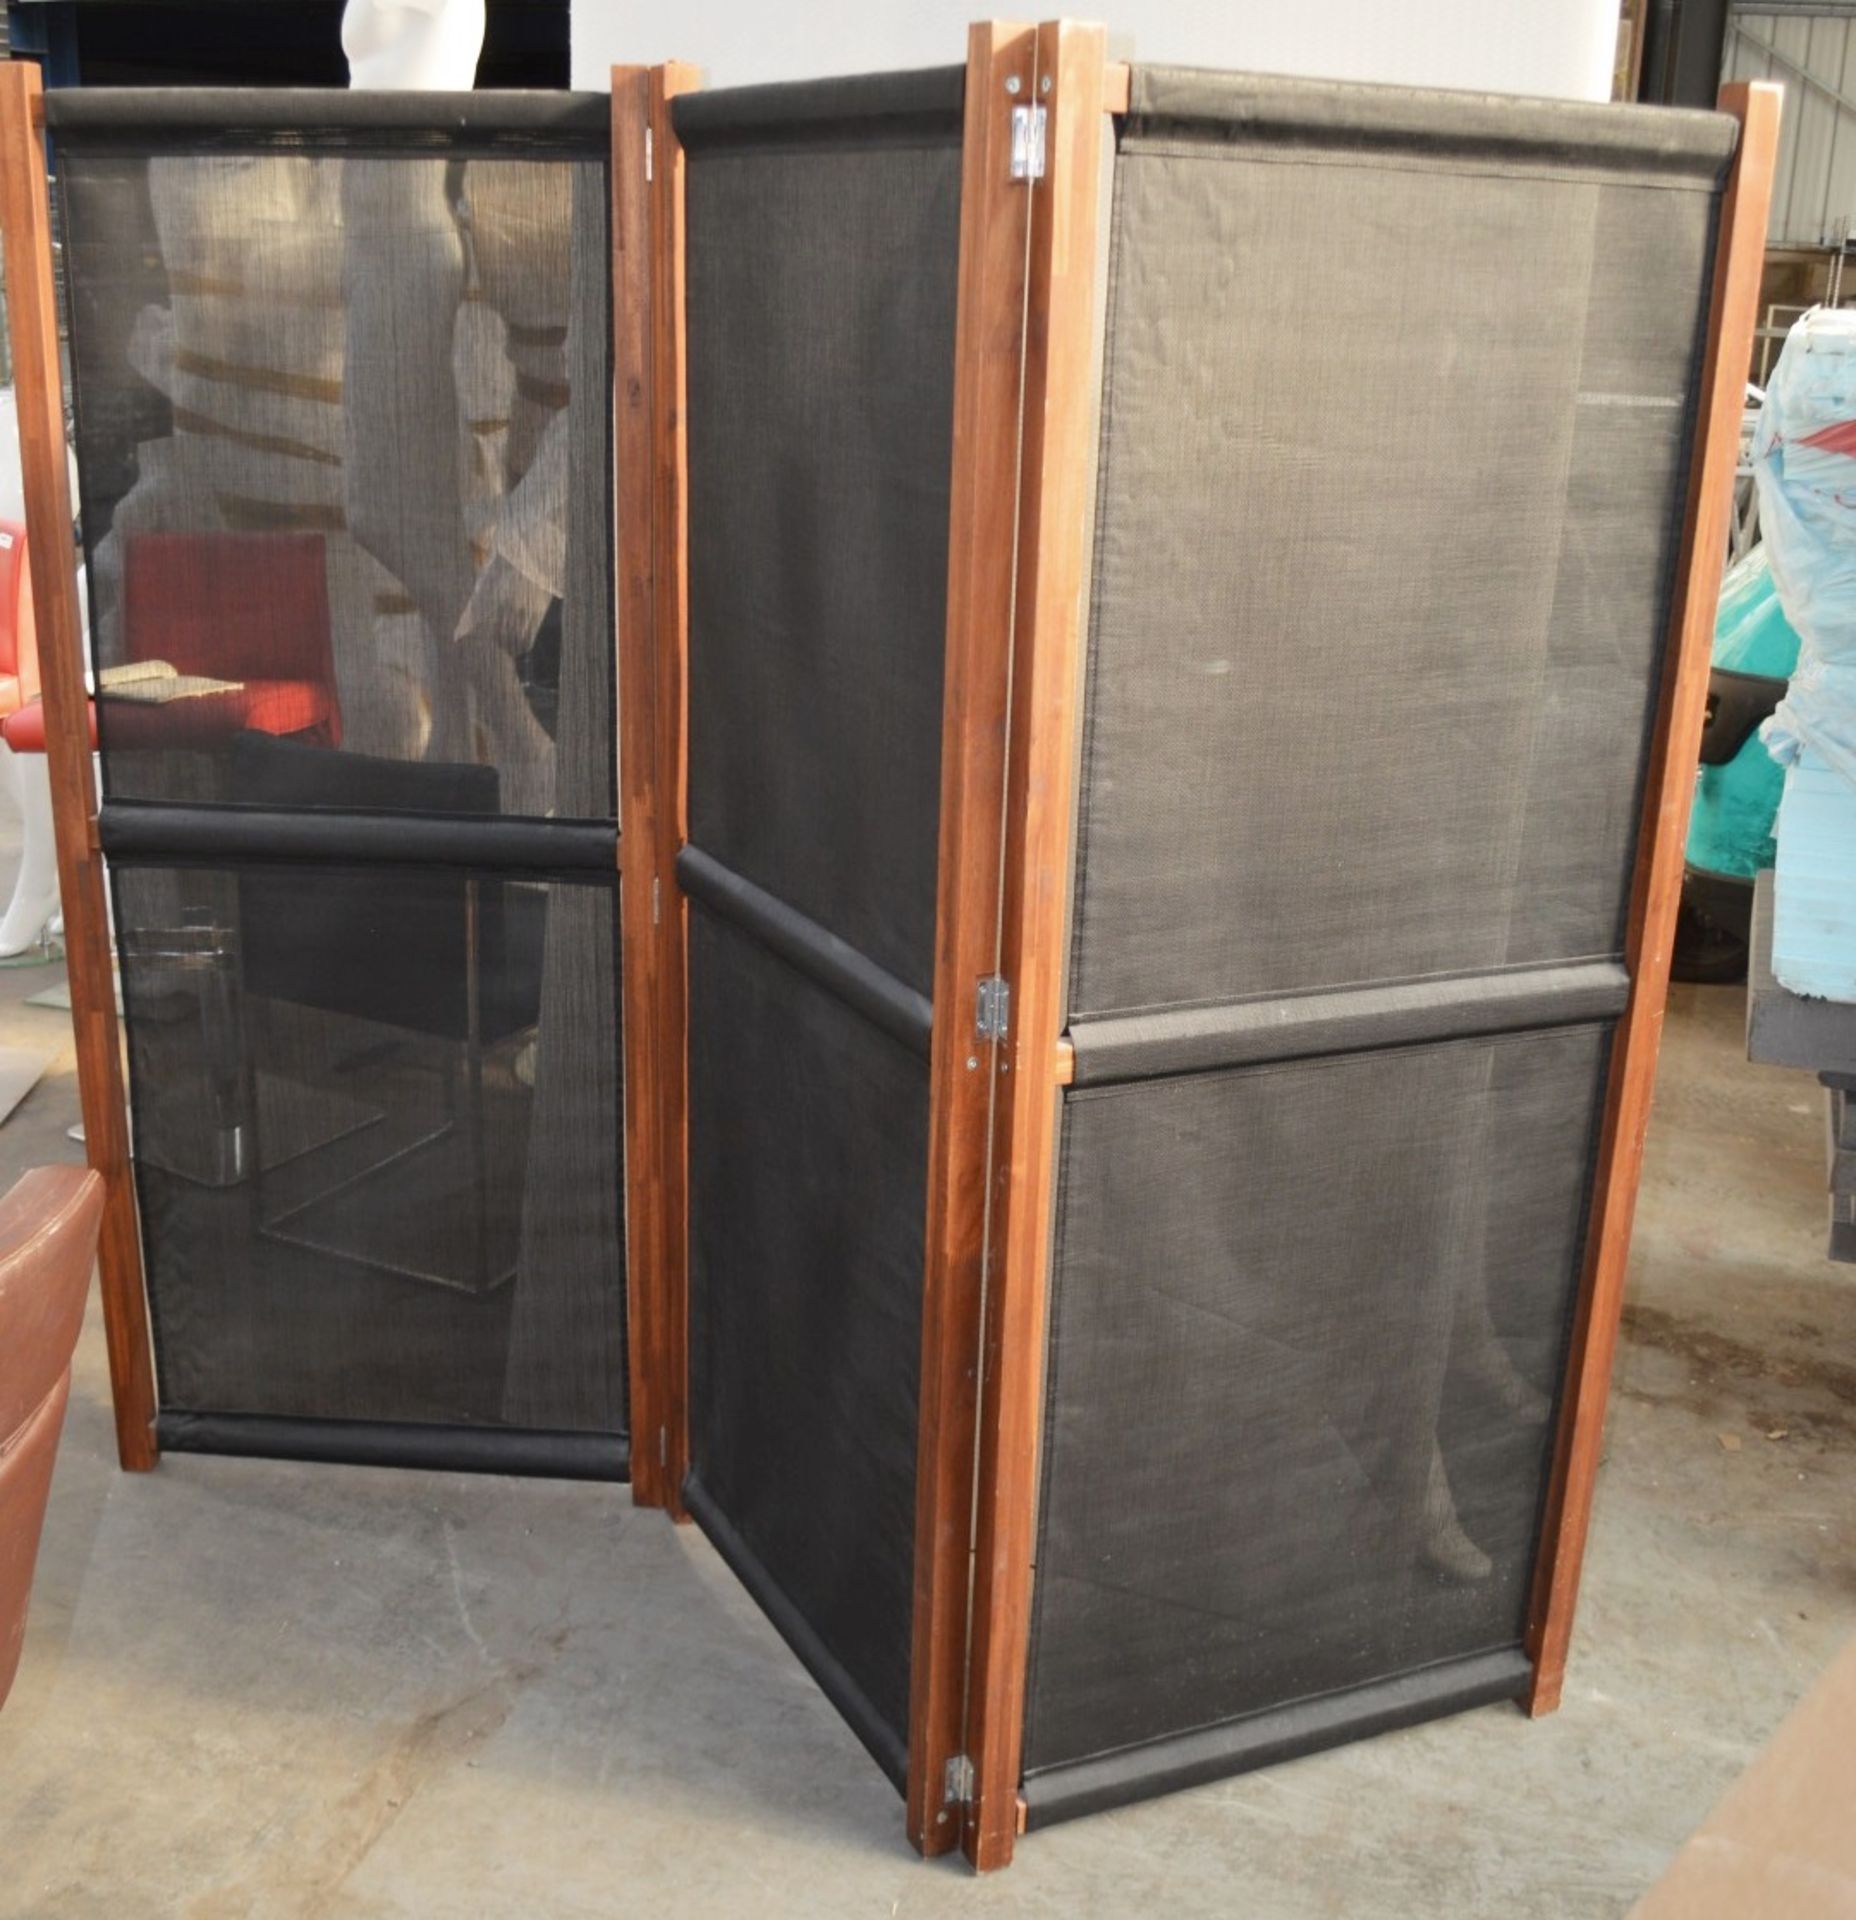 1 x 3-Panel Dressing Screen / Divider  - Dimensions (approx): H180 x W135cm - Ref: MHB115 - Image 3 of 4